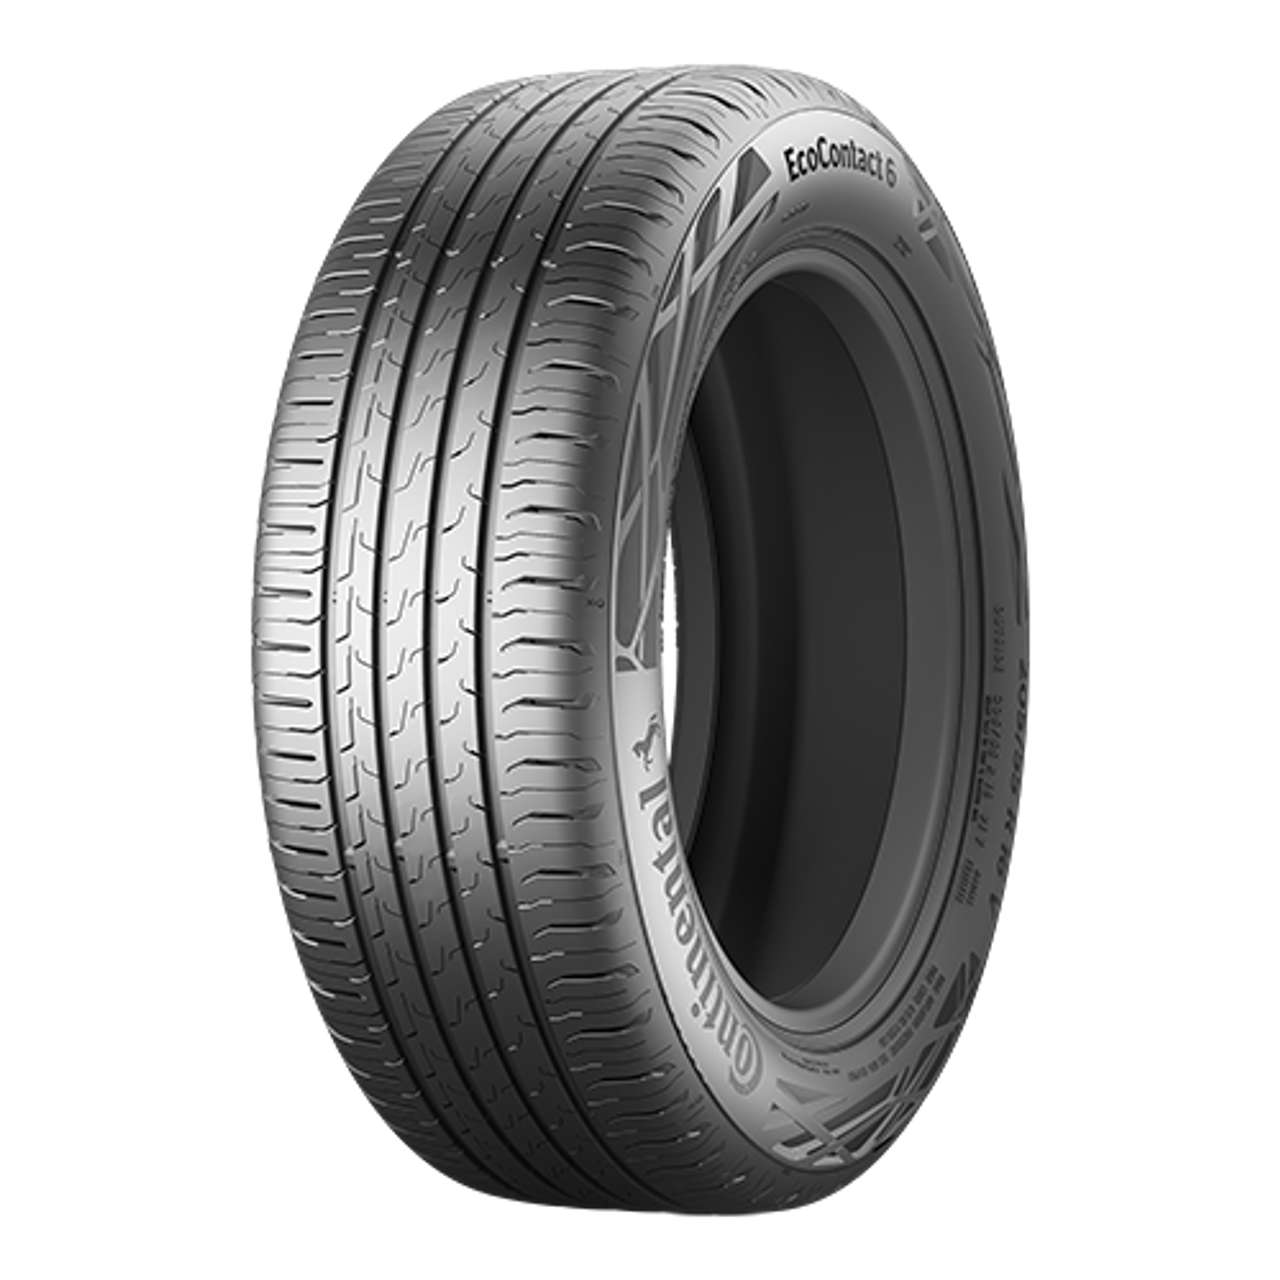 CONTINENTAL ECOCONTACT 6 (EVc) 235/55R18 100V BSW